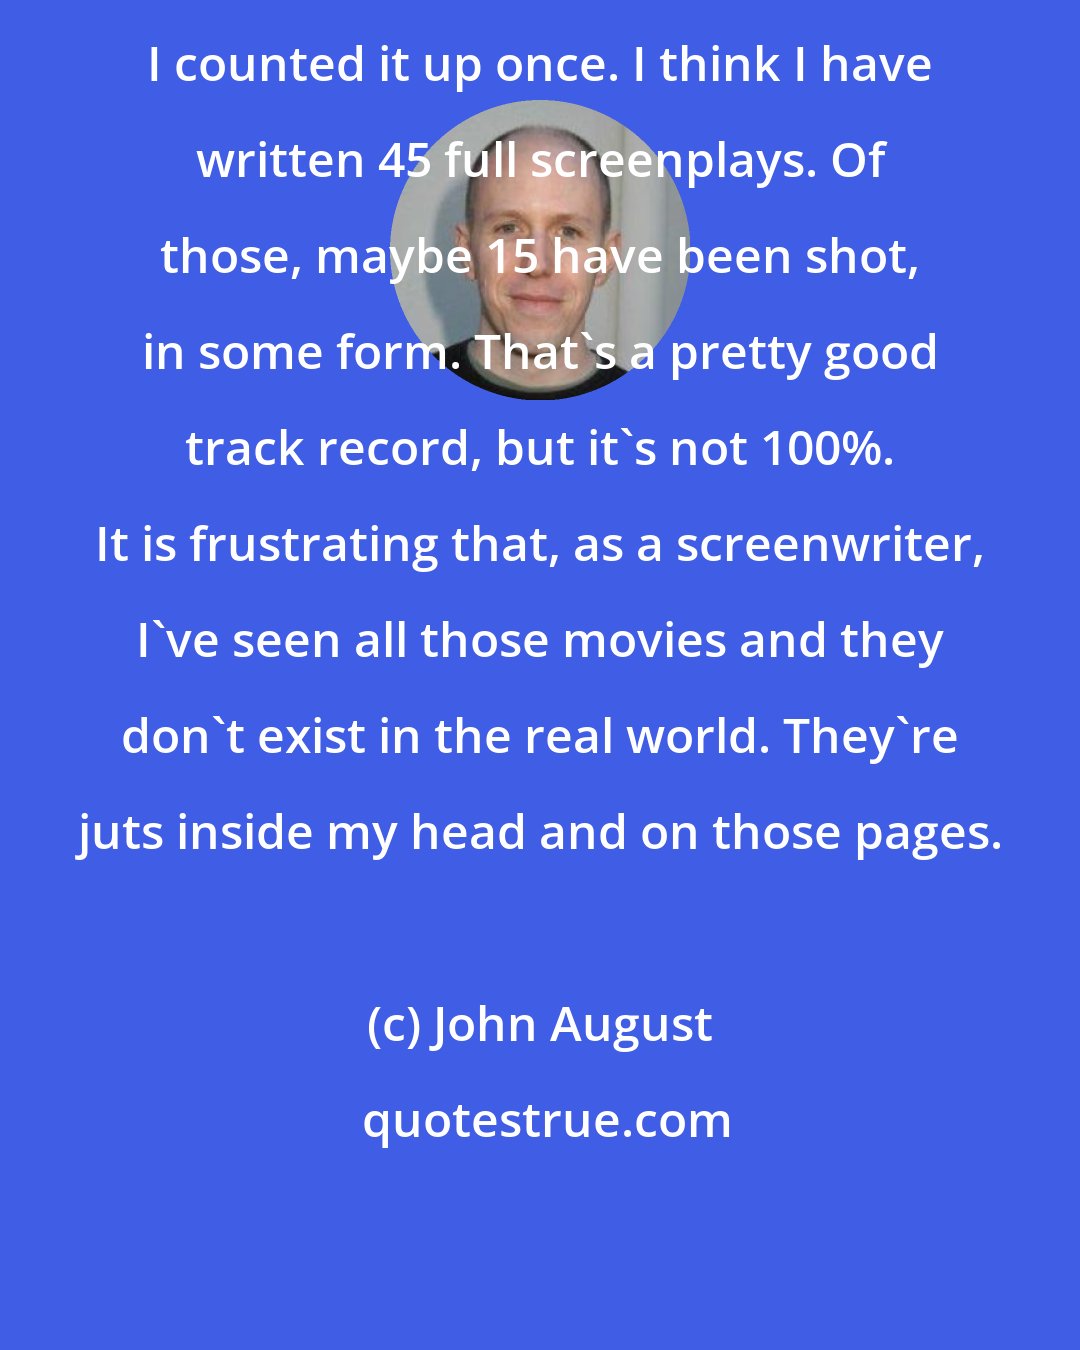 John August: I counted it up once. I think I have written 45 full screenplays. Of those, maybe 15 have been shot, in some form. That's a pretty good track record, but it's not 100%. It is frustrating that, as a screenwriter, I've seen all those movies and they don't exist in the real world. They're juts inside my head and on those pages.